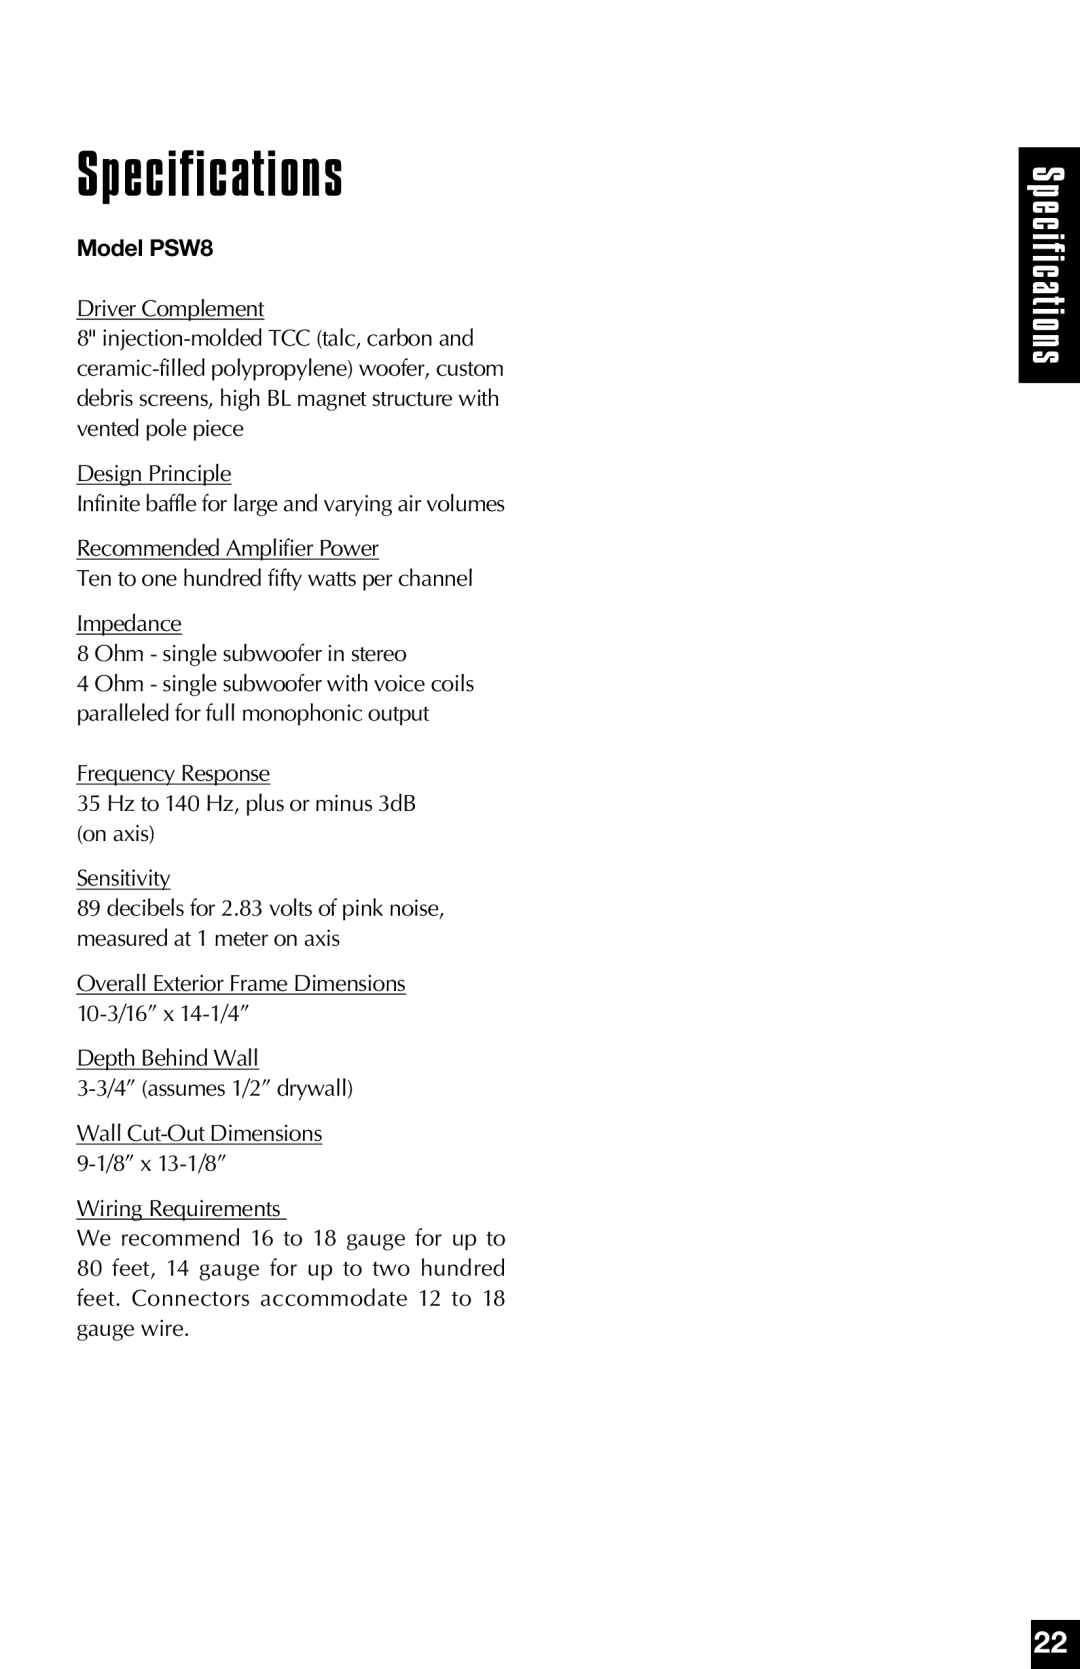 Niles Audio manual Specifications, Model PSW8 